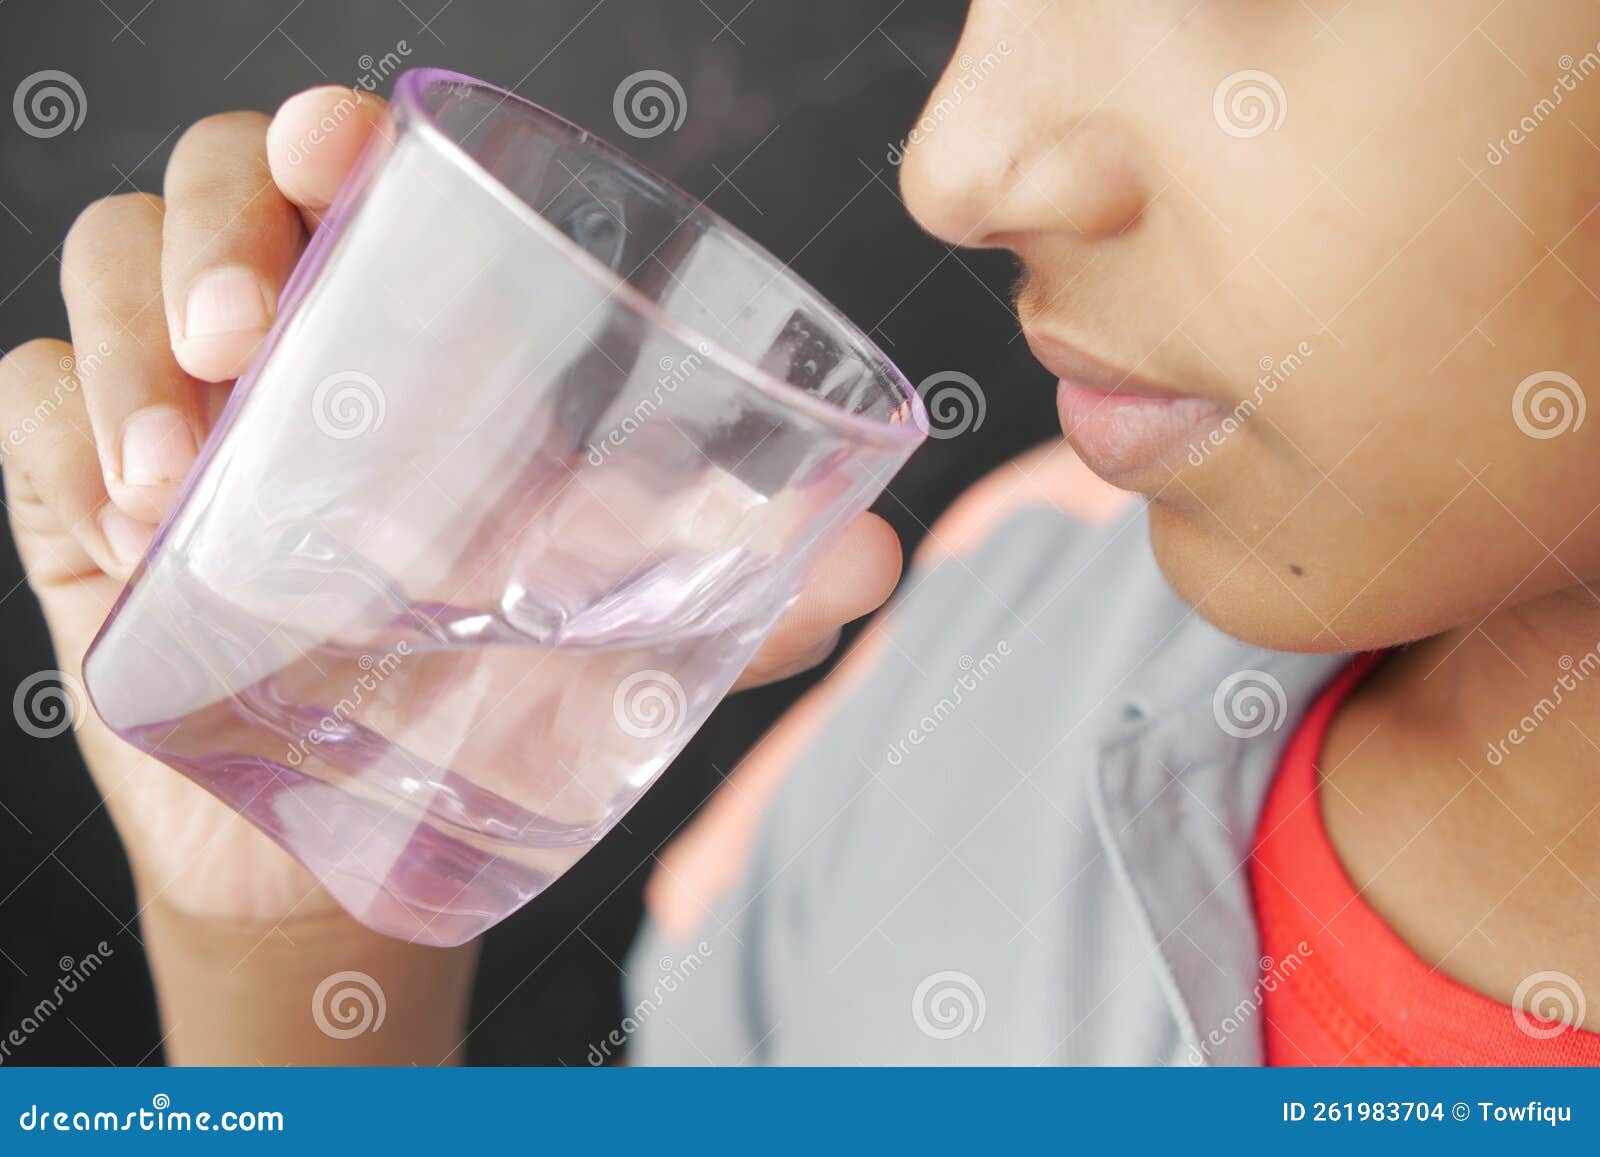 Teen Boy 12-14 Year Old Drinking Fresh Water From A Bottle. Student Teenager  With Headphones And Sunglasses Posing Outdoors. Stock Photo, Picture and  Royalty Free Image. Image 60008603.